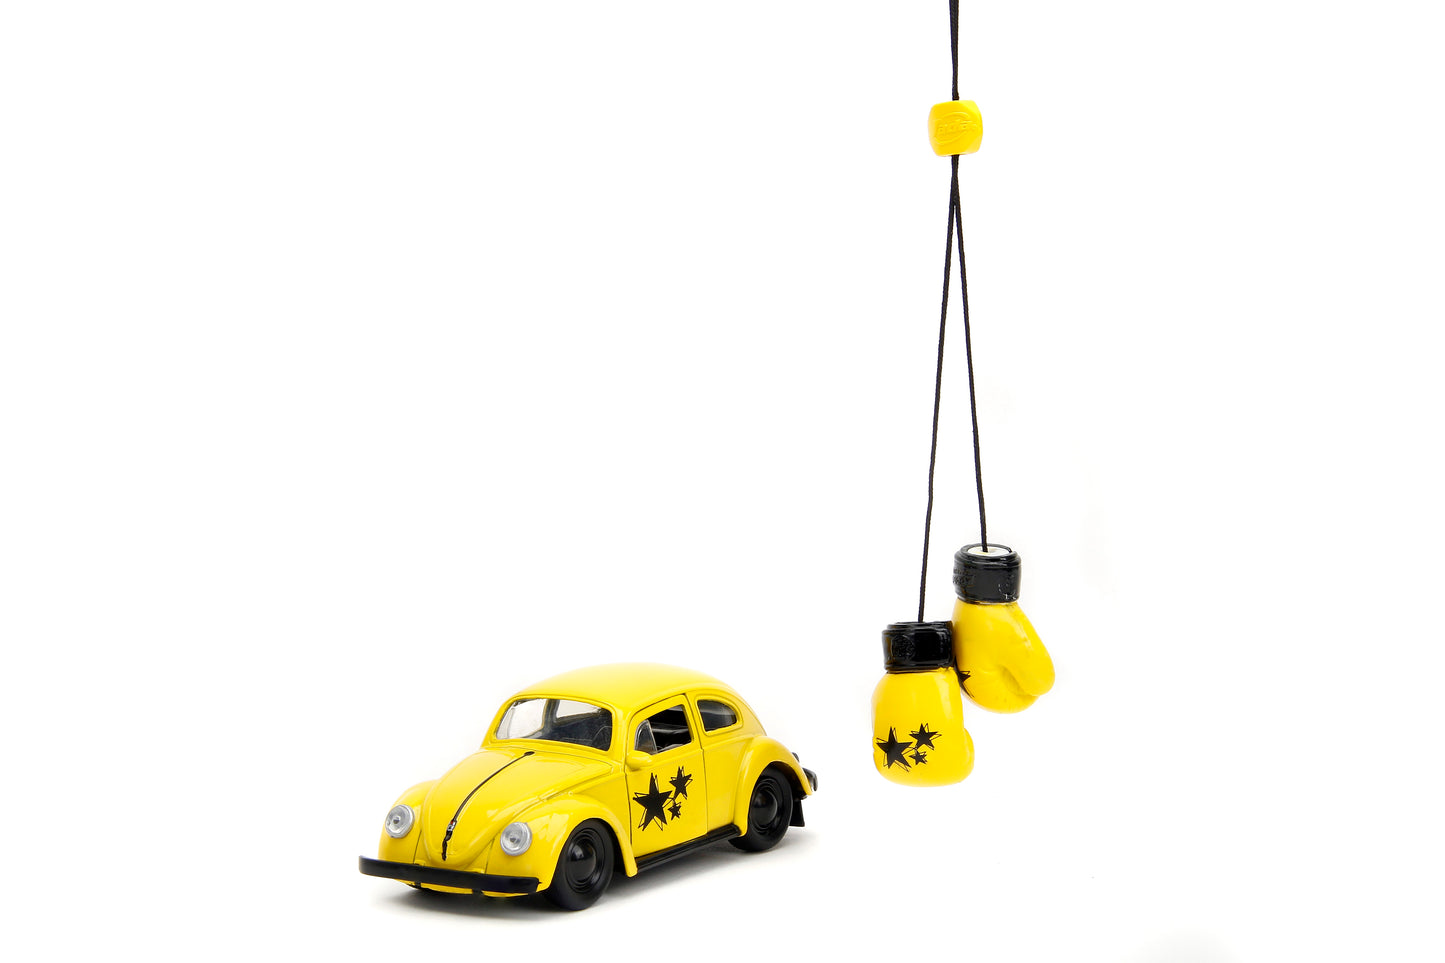 Punch Buggy 1:32 1959 Volkswagen Beetle Die-cast Car with Mini Gloves Accessory (Yellow) (This is a Pre Order)